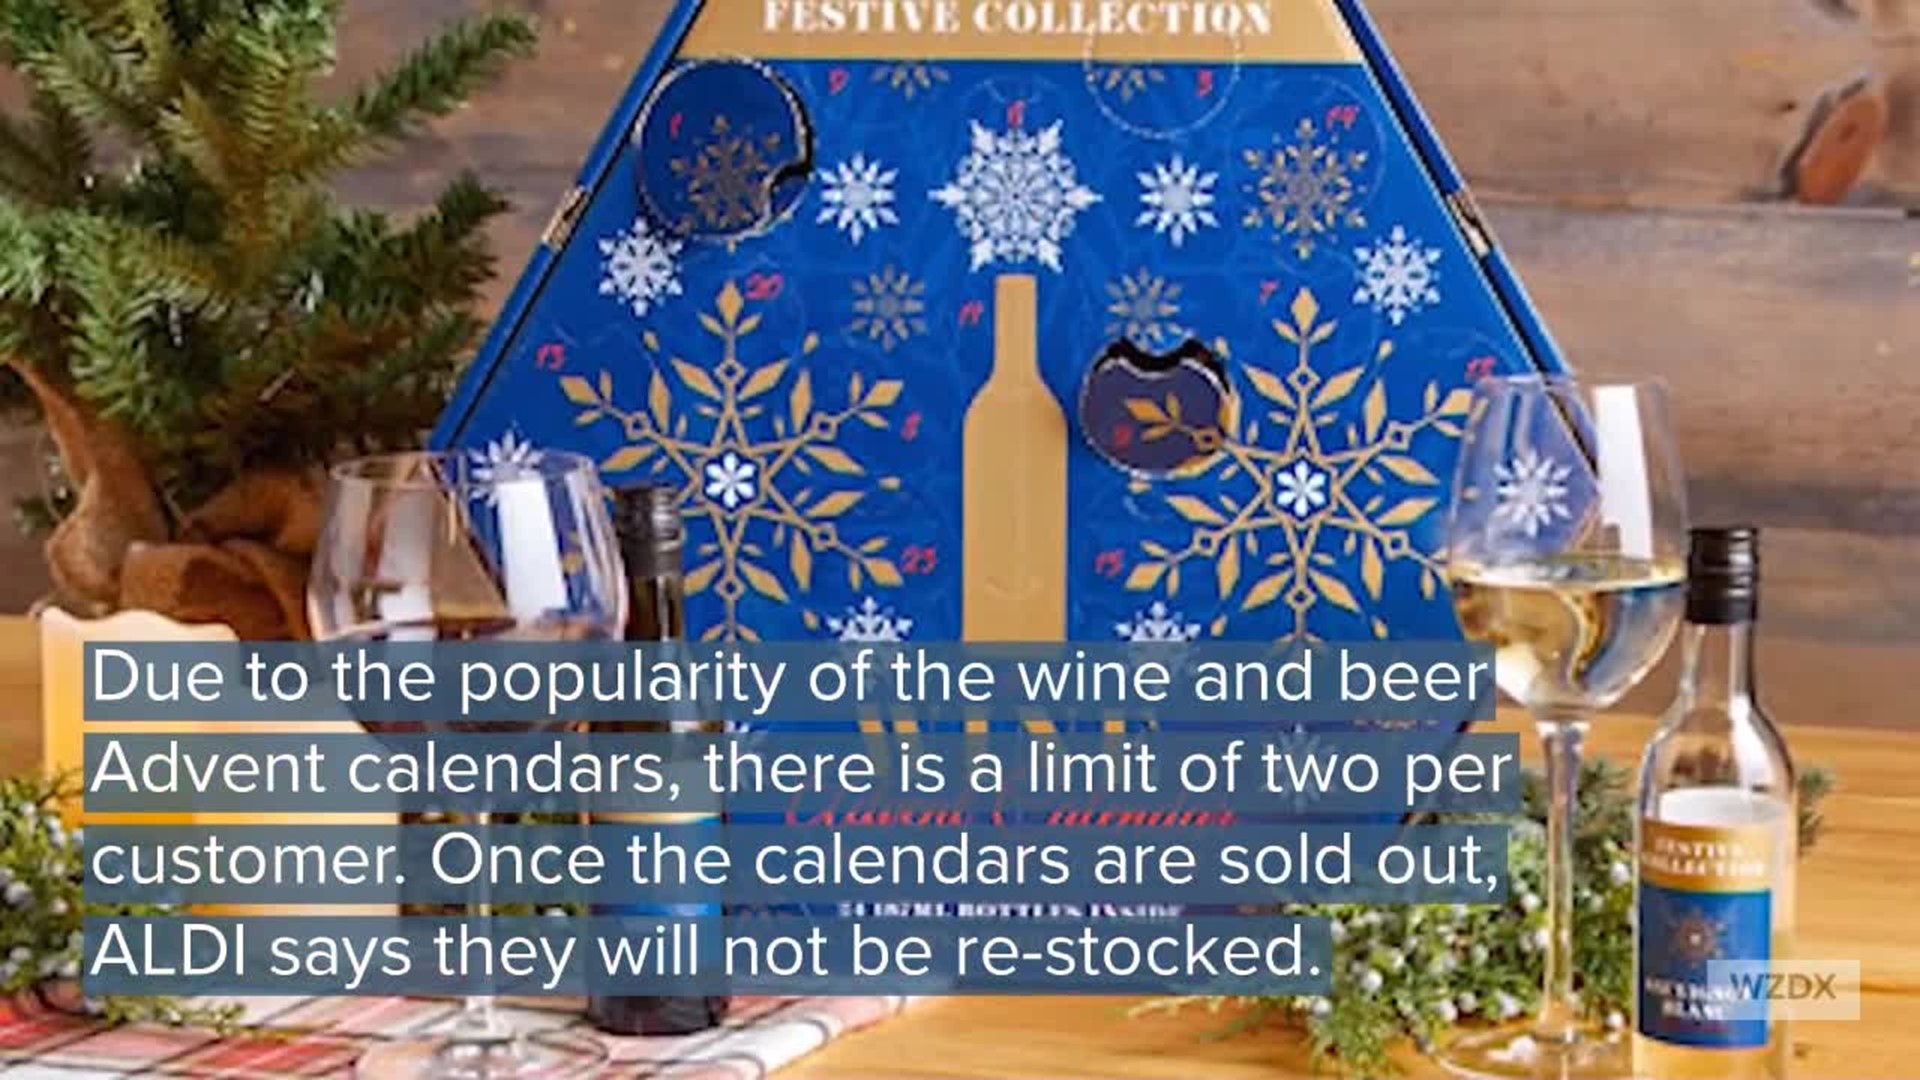 ALDI's released their Advent calendars Wednesday, and they're available while supplies last.